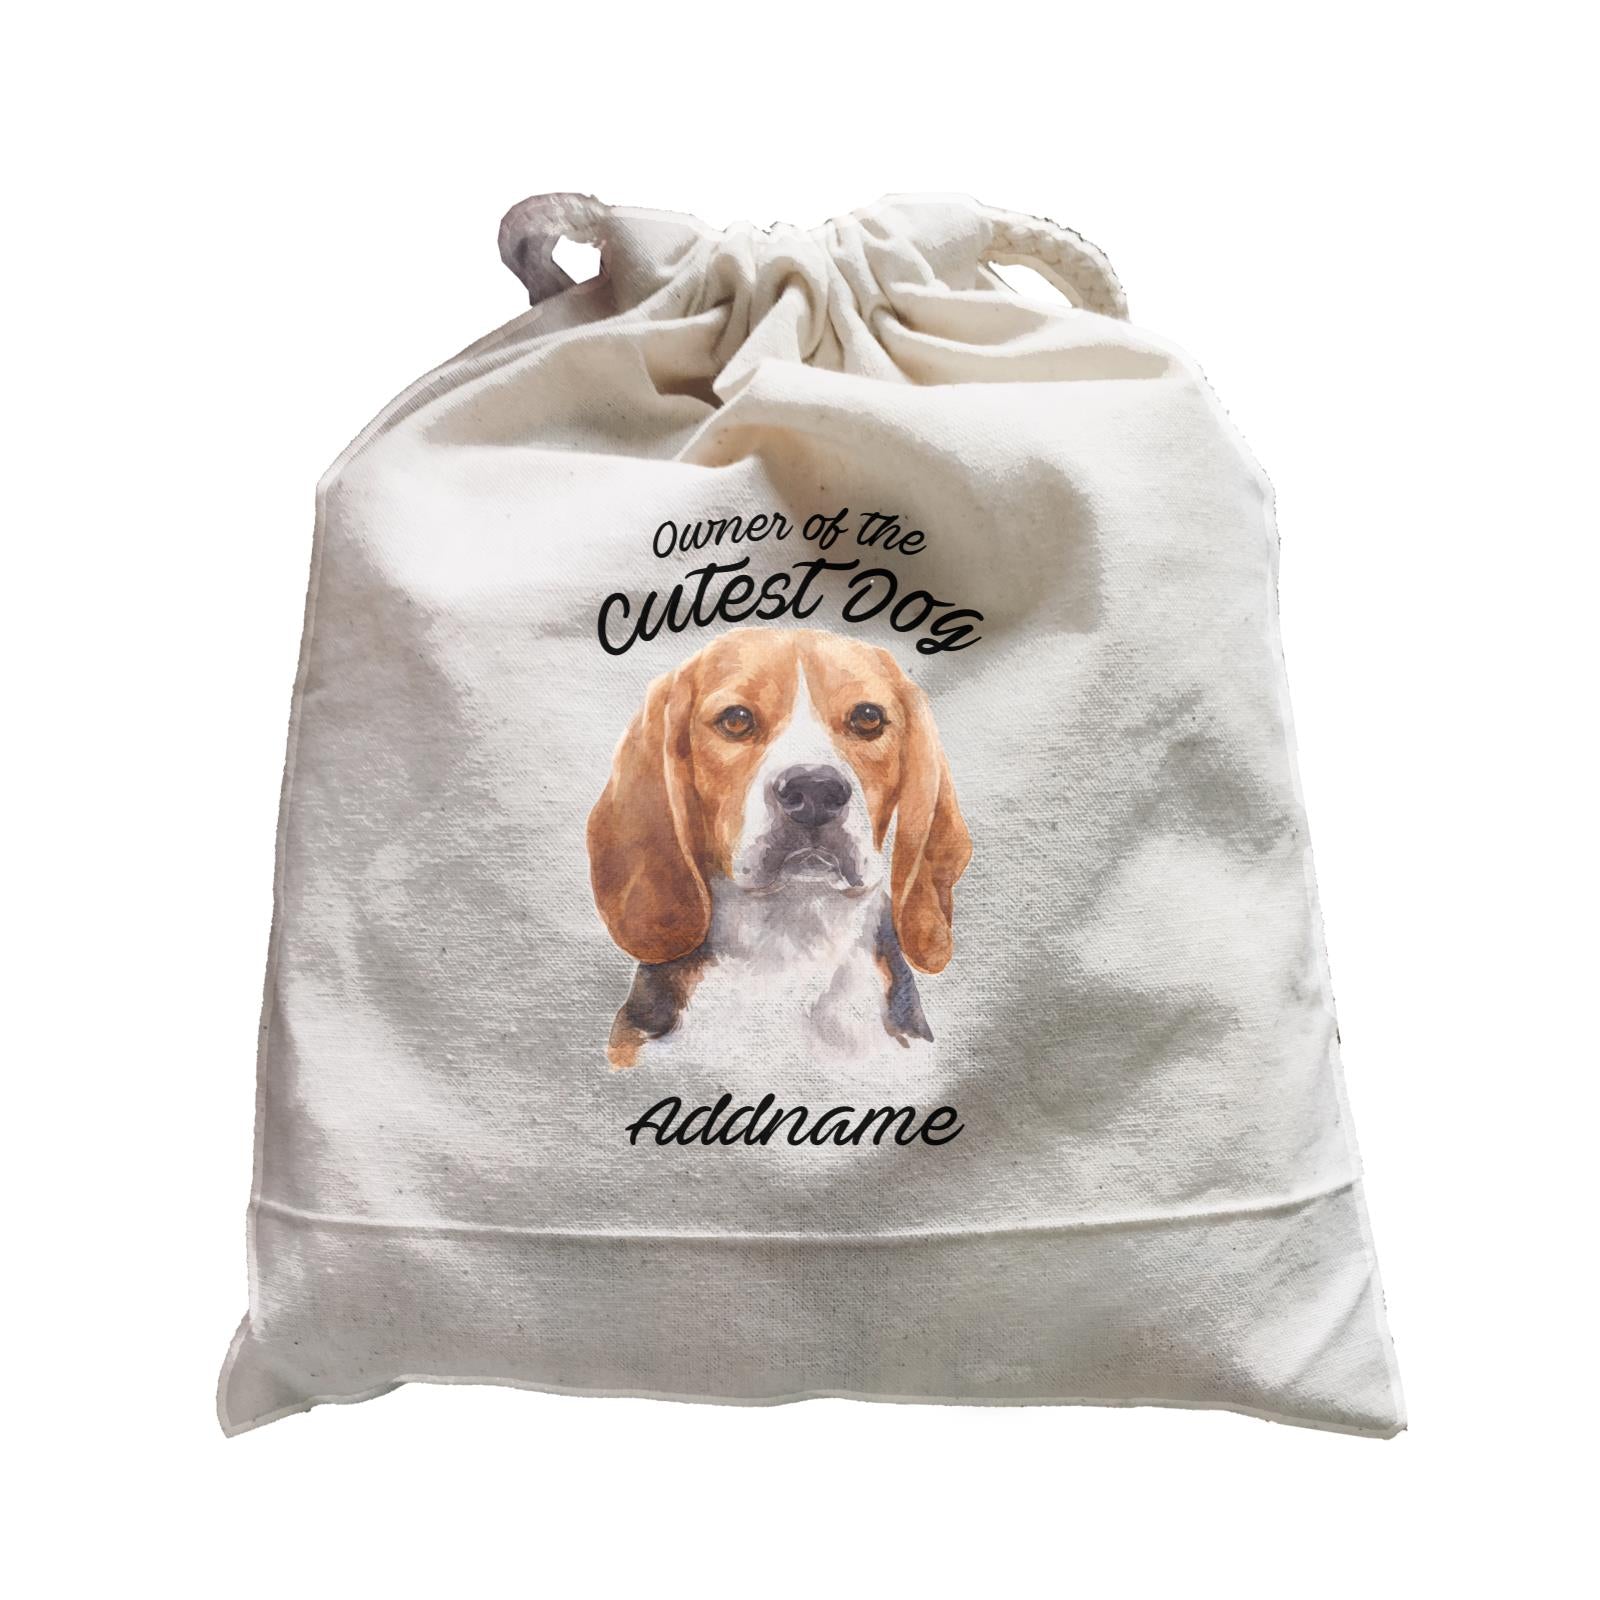 Watercolor Dog Owner Of The Dog Beagle Frown Addname Satchel